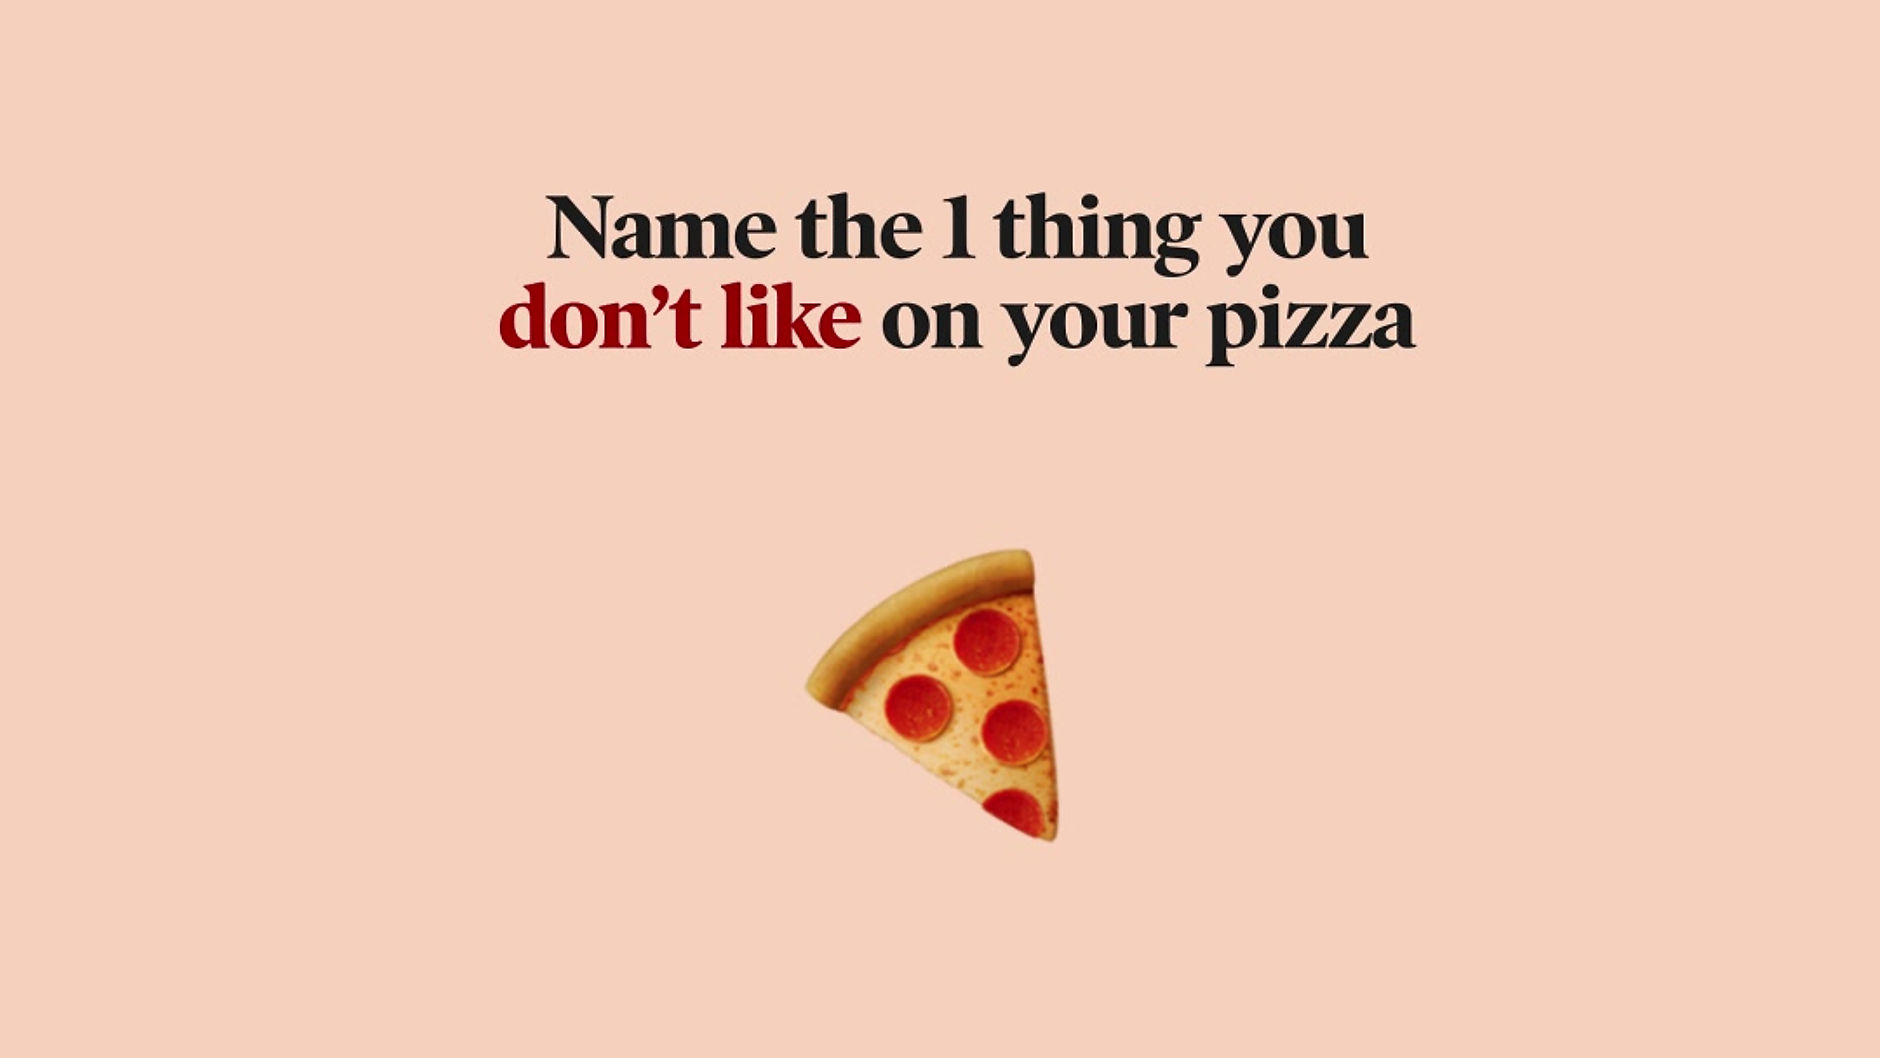 1 thing you don't like on pizza - Video